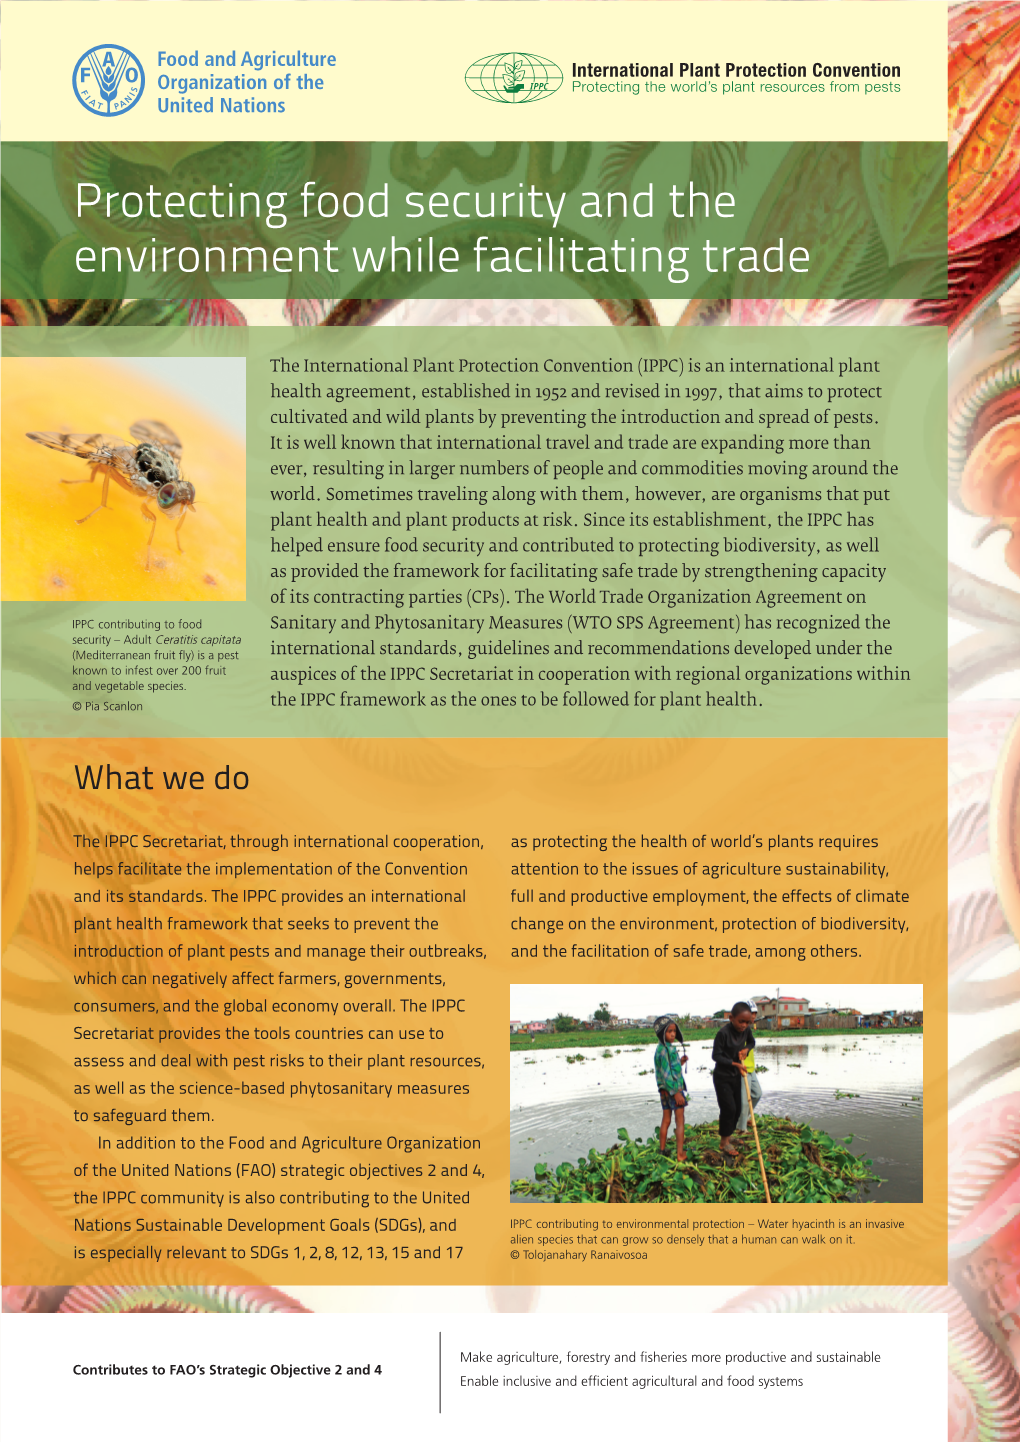 Protecting Food Security and the Environment While Facilitating Trade